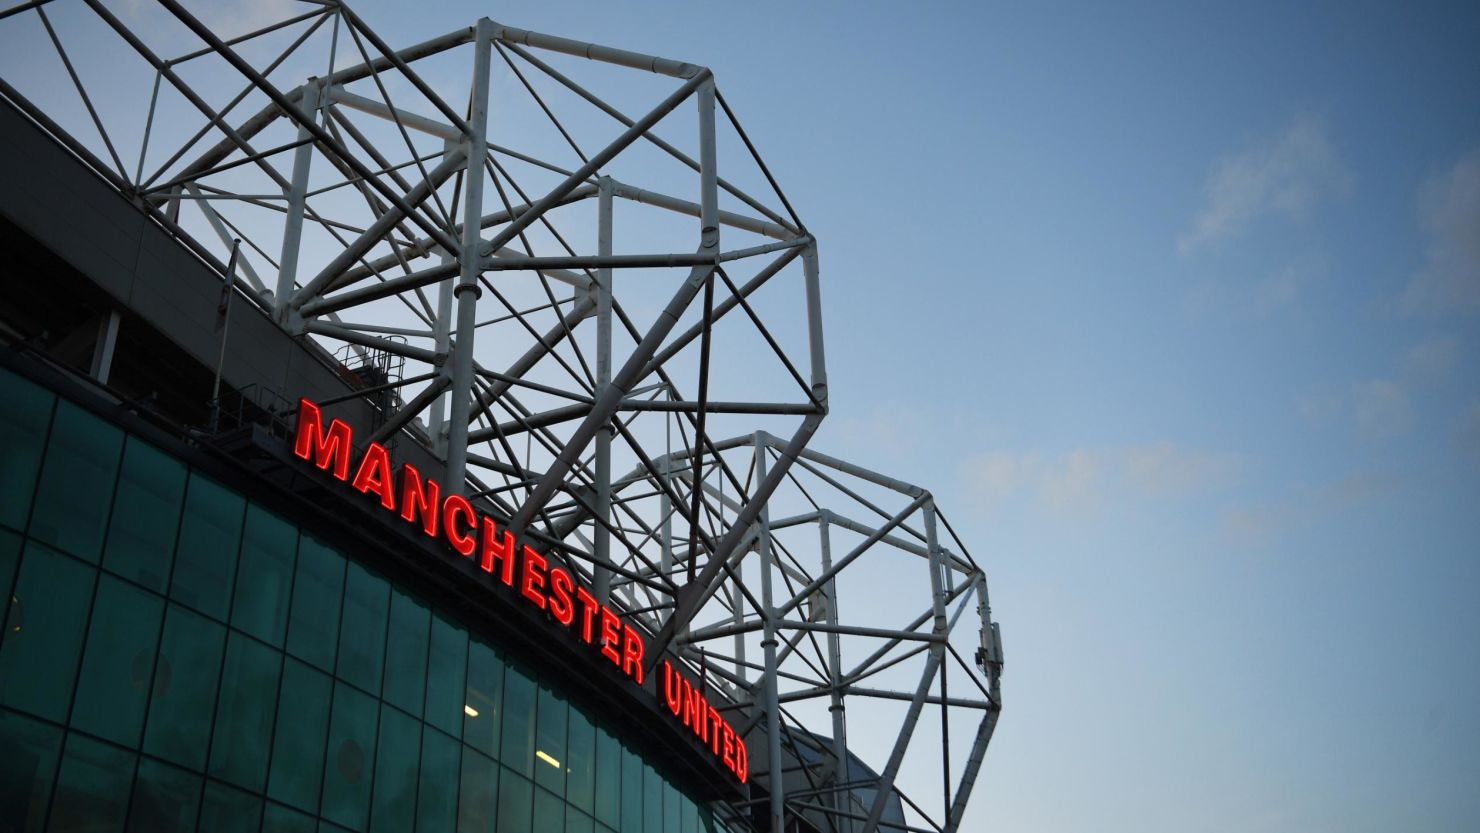 Manchester United women's team "must offer academy players a clear route to top-level football within the club," executive vice-chairman Ed Woodward.